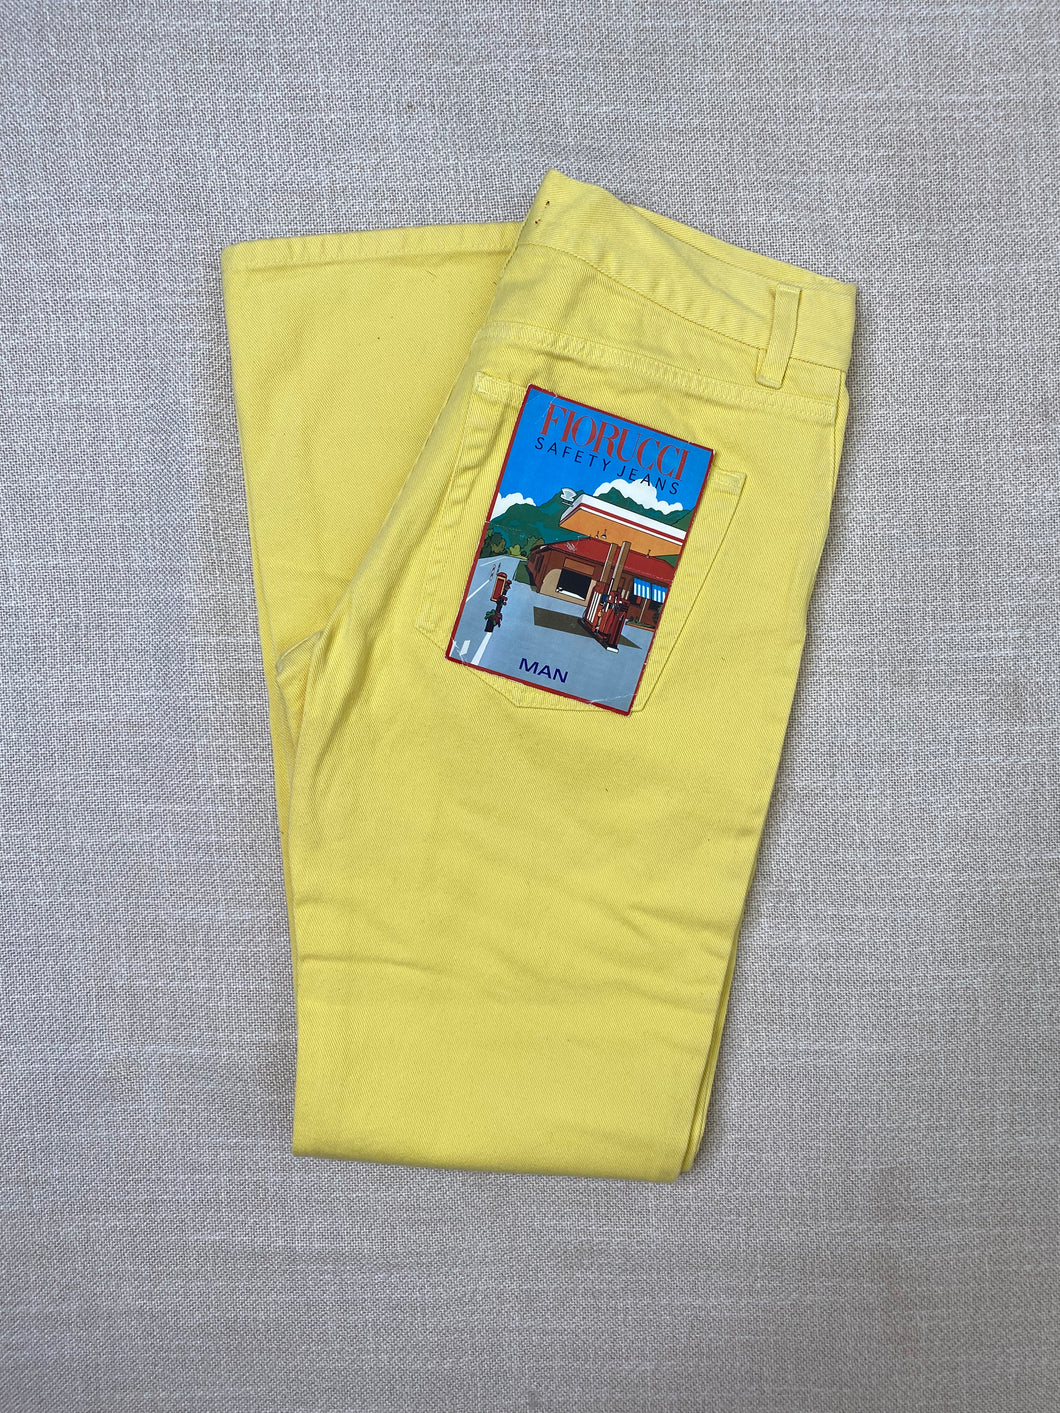 1980s Fiorucci bootcut jeans yellow NOS